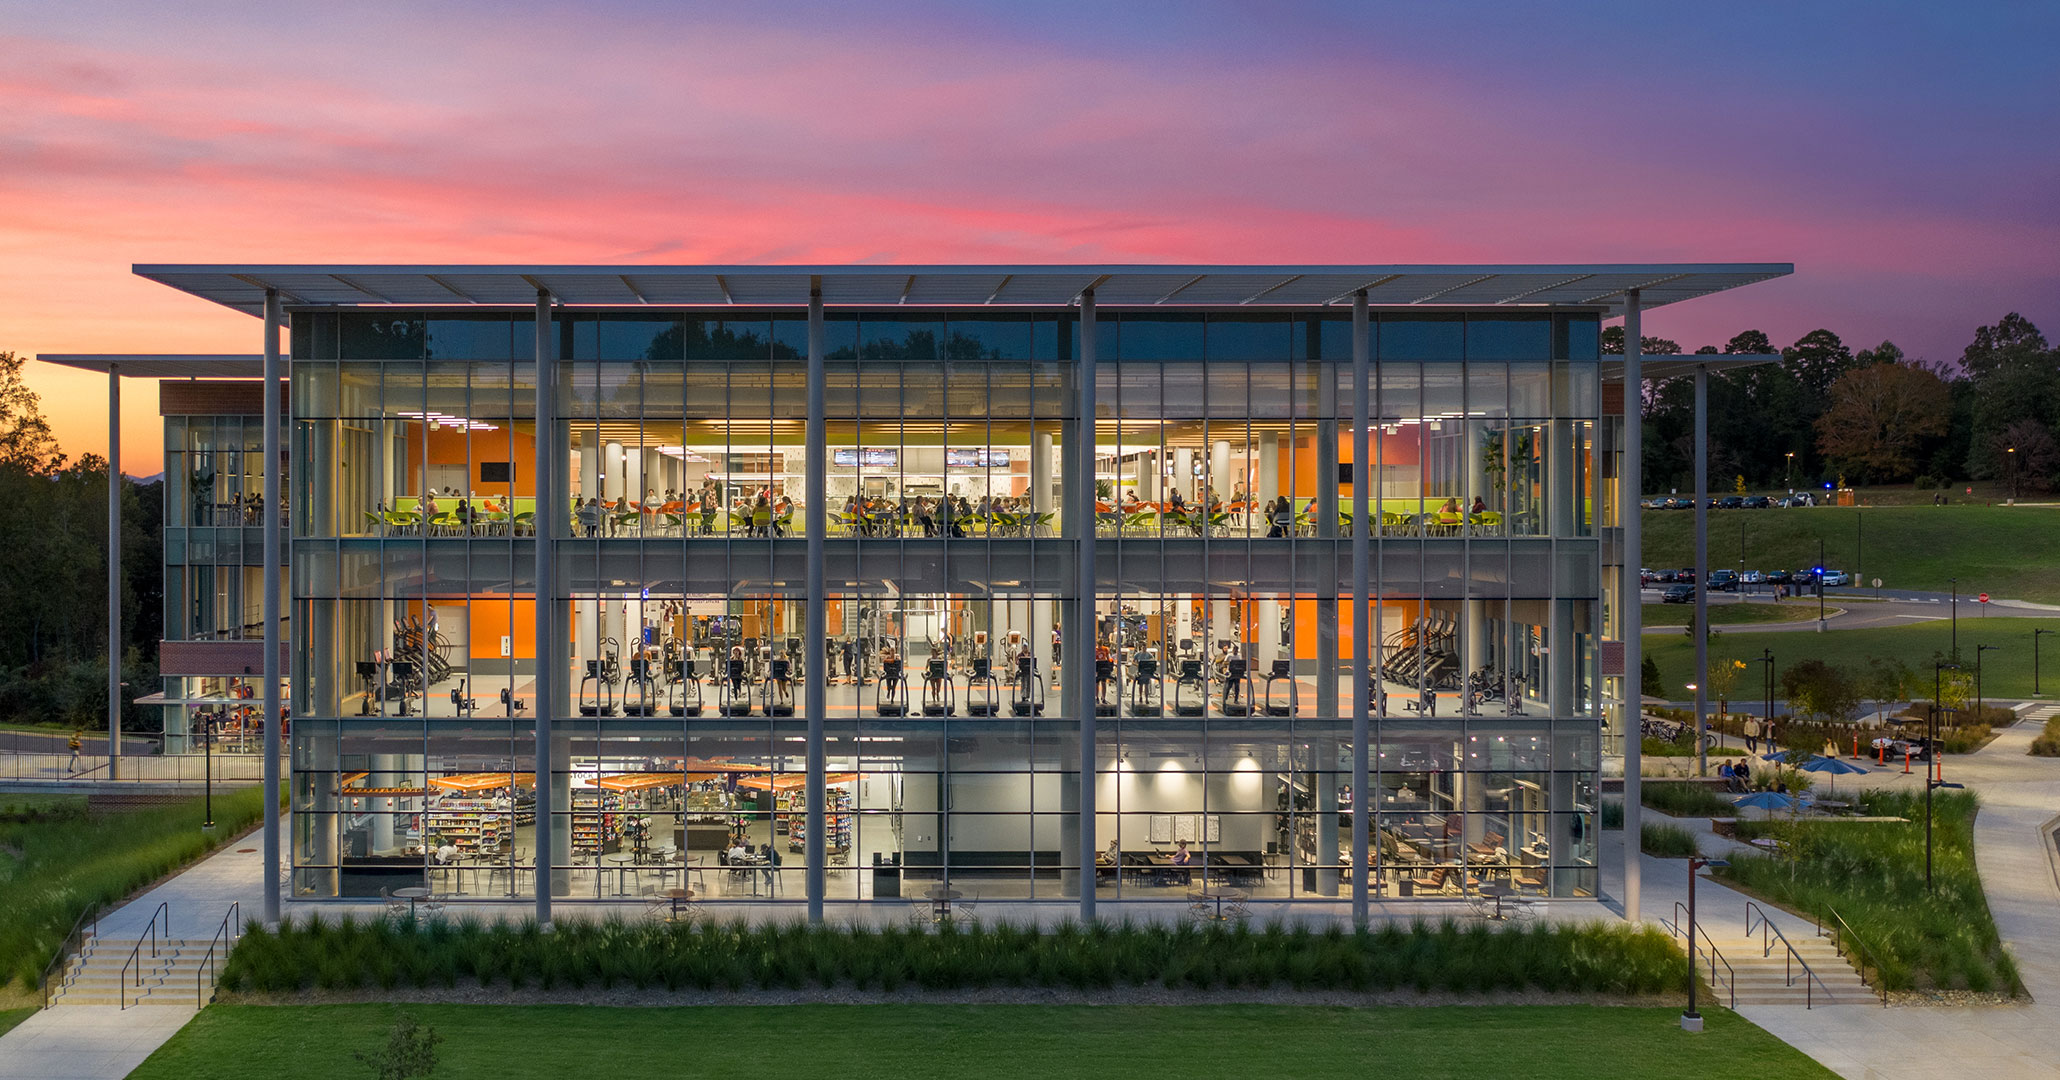 Clemson University worked with Boudreaux architects to design Douthit Hills Student Hub.